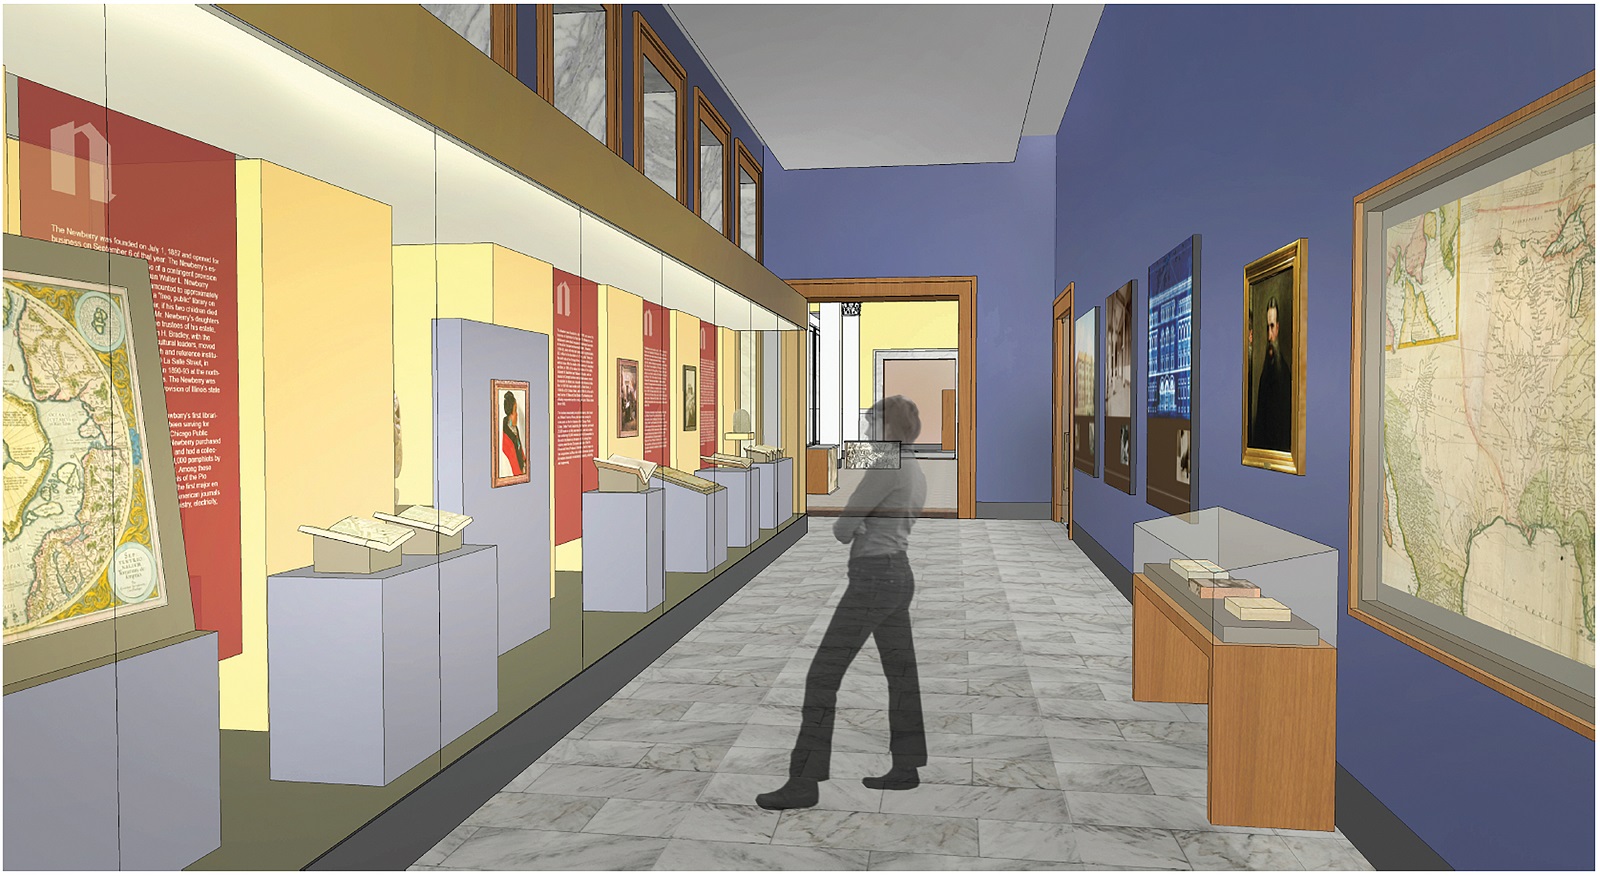 A permanent exhibition gallery will showcase collection highlights.